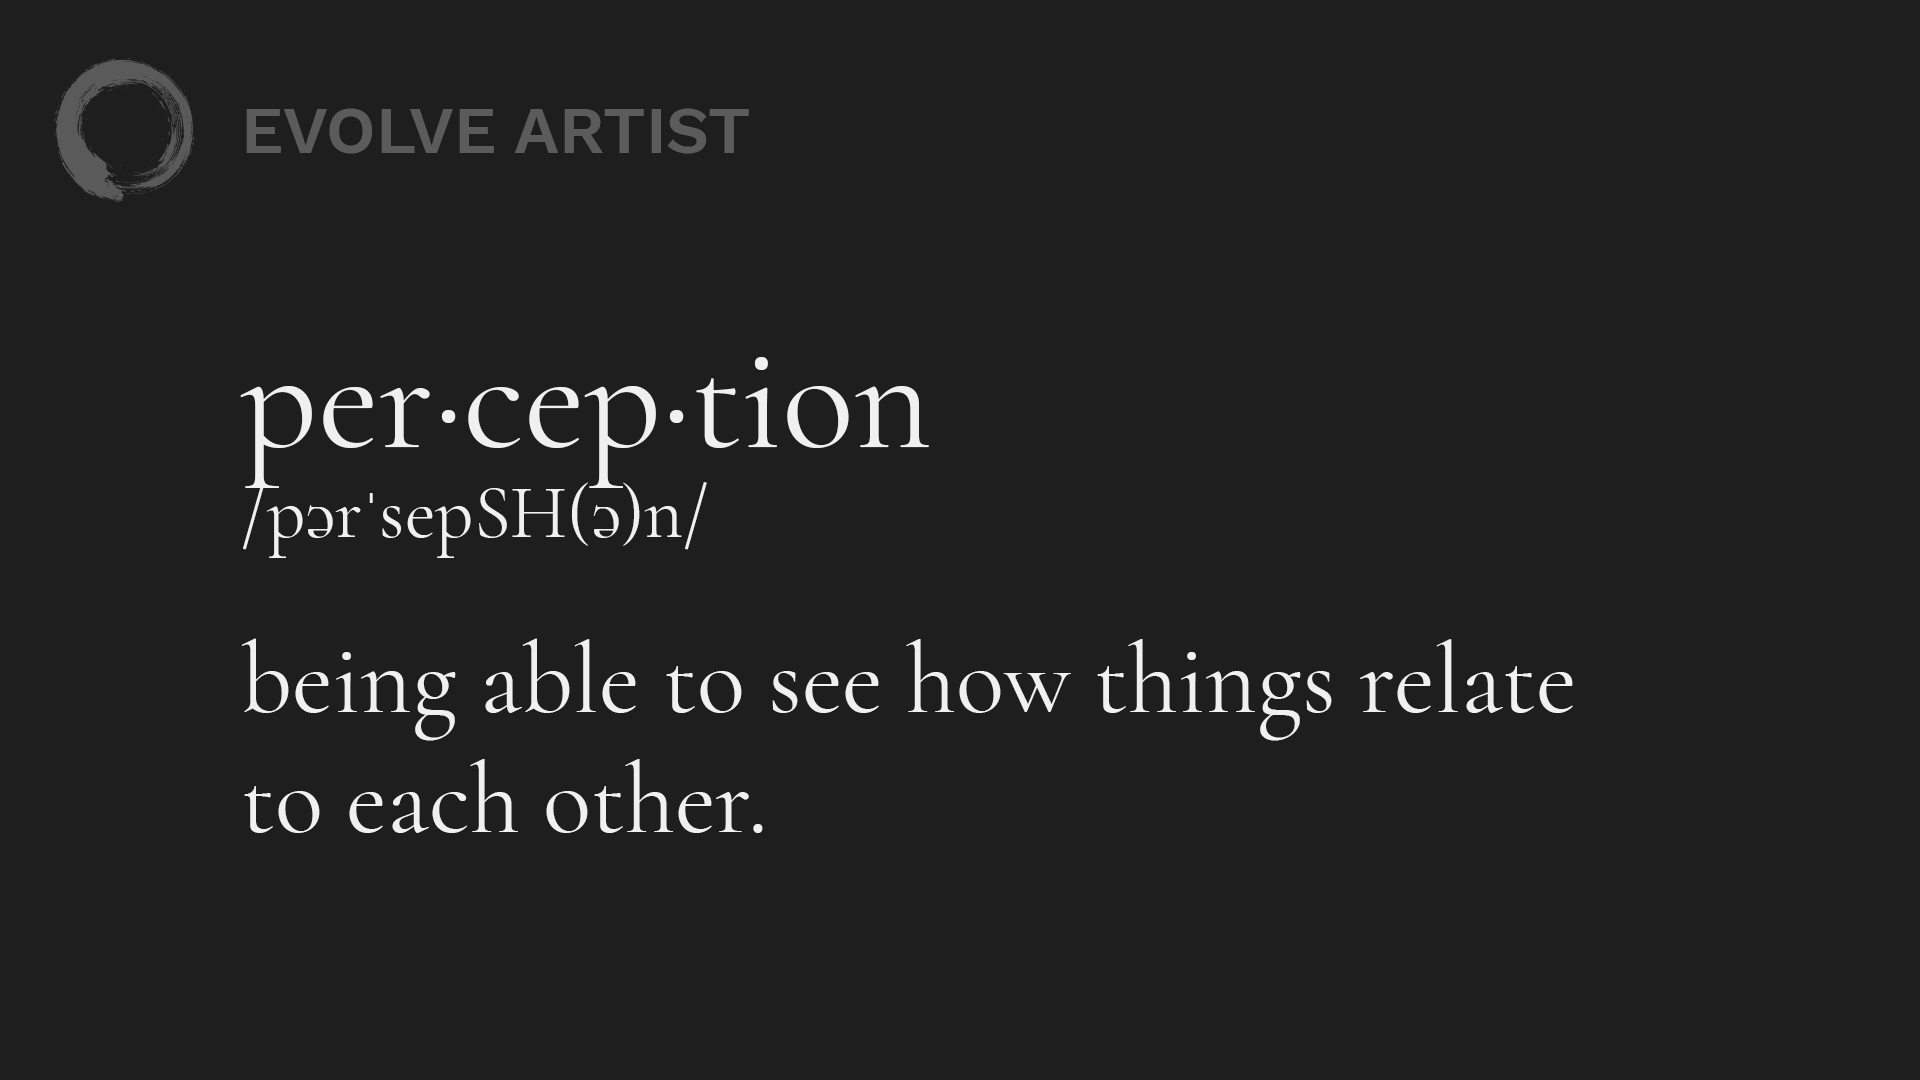 Perception is the ability to see how things relate to each other and is an essential skill for any artist. 